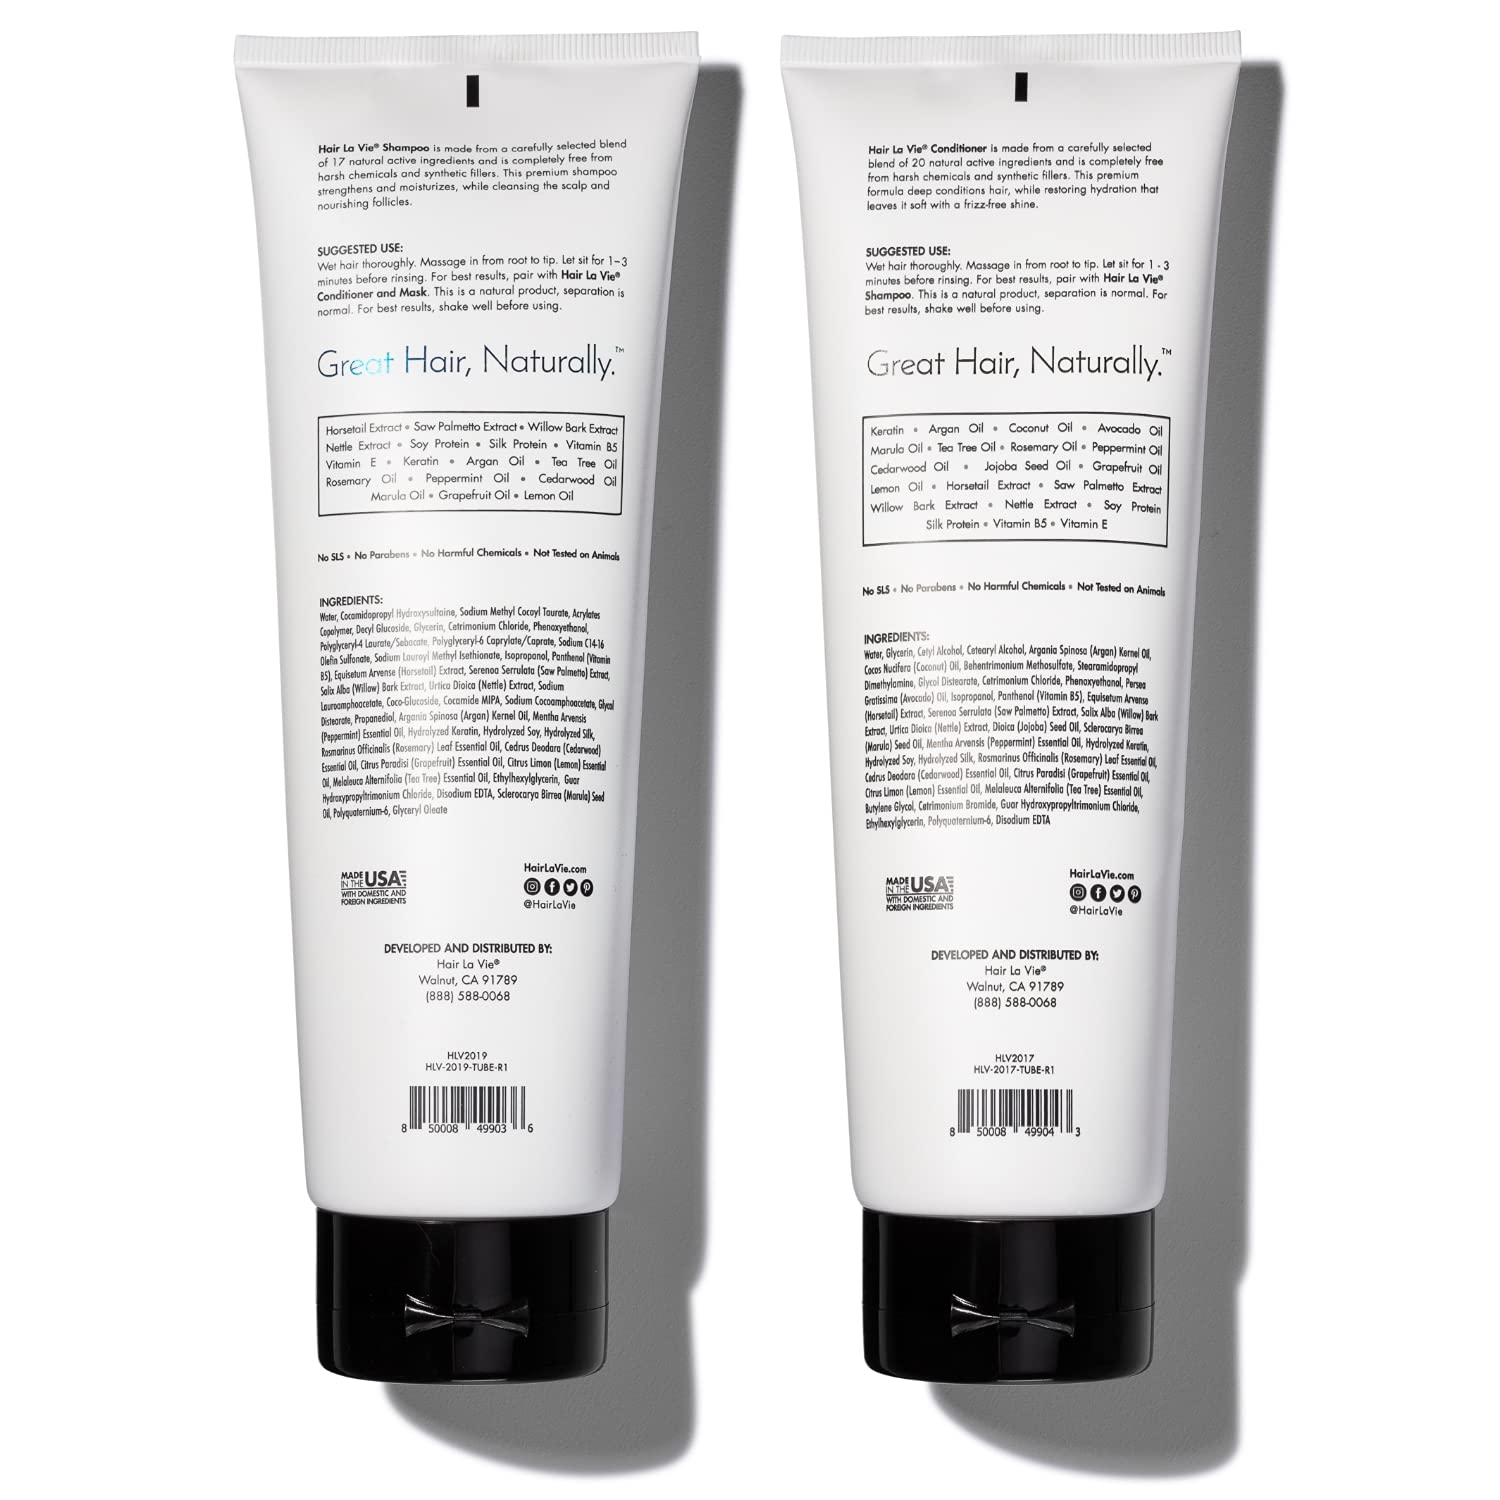 Hair La Vie Shampoo & Conditioner - Best Shampoo and Conditioner for Dry Damaged Hair - Speed Up Hair Growth and Boost Volume, 9 fl oz.